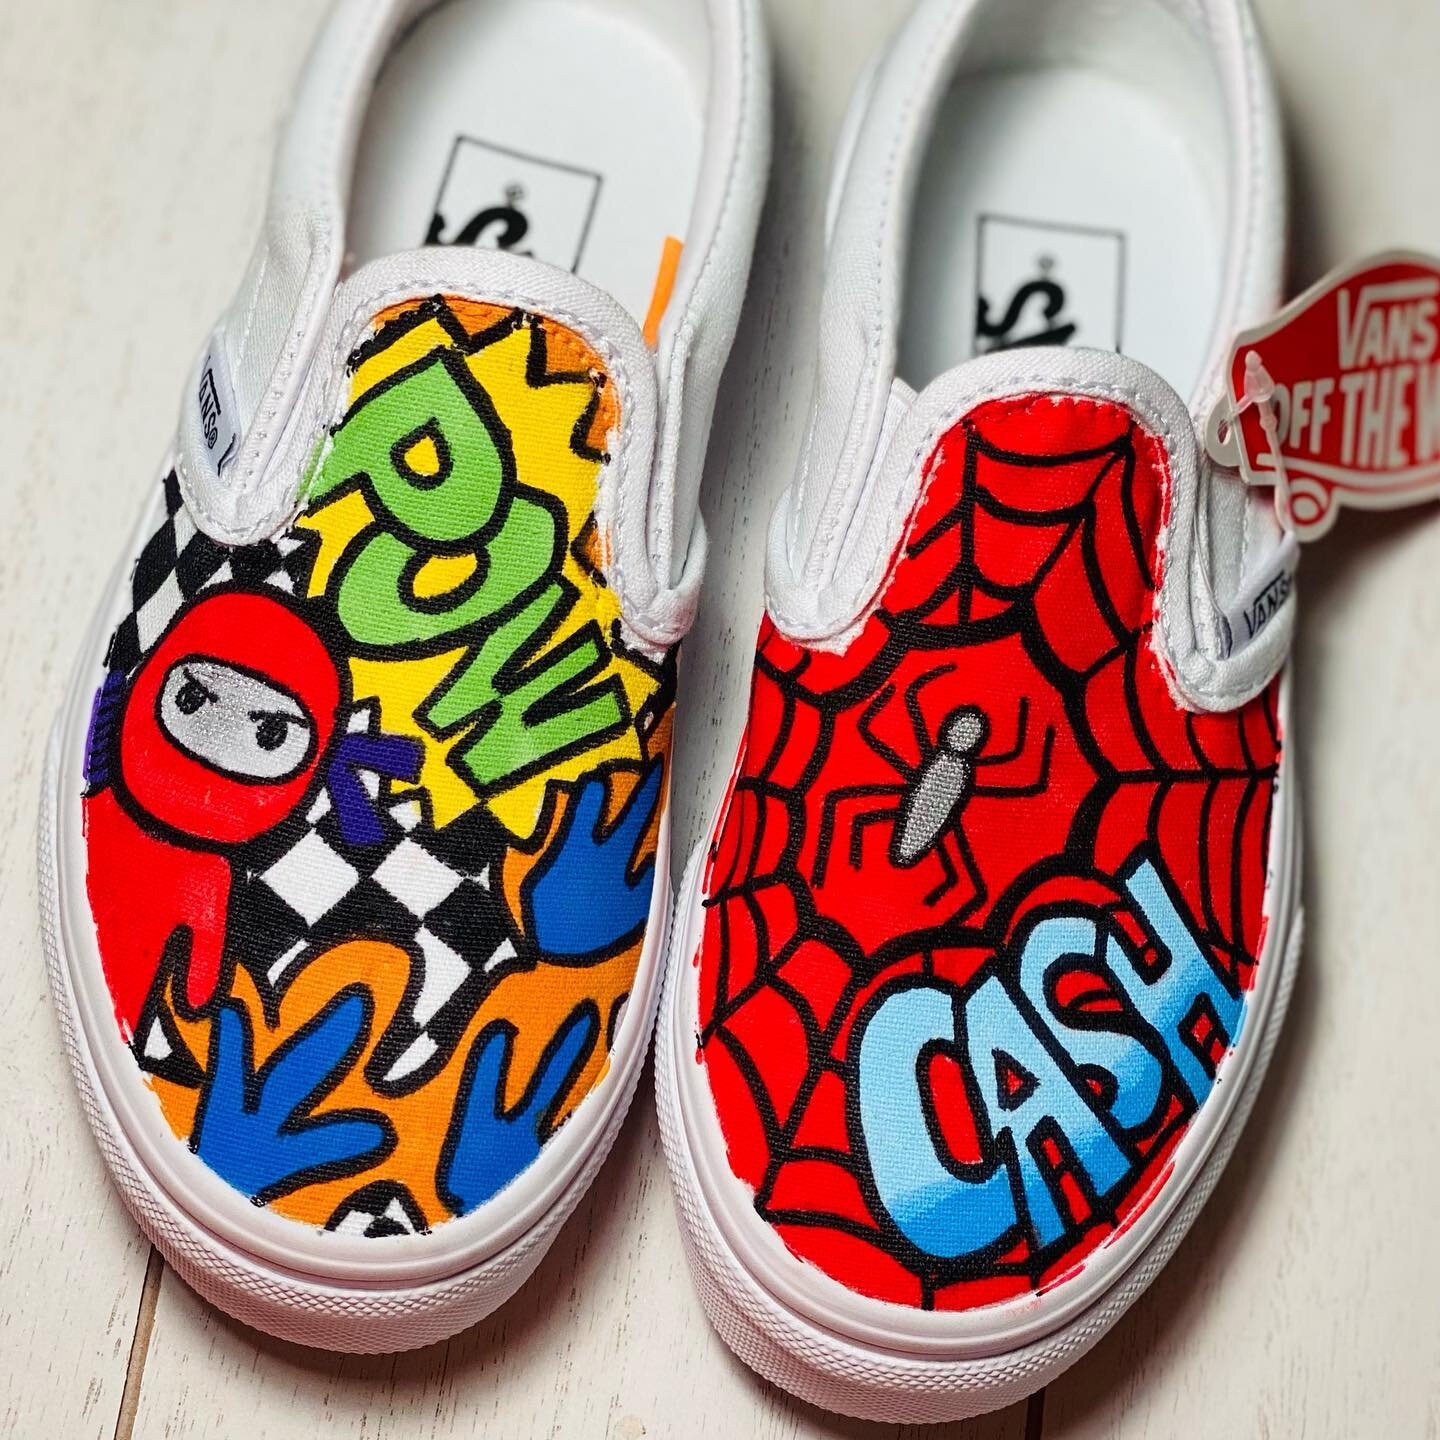 Cashy, these turned out Spidertastic! 🕷 hope these are everything you hoped and more! 🥷 🦖 💥. #customshoes #custom #jordan #shoes #vanstyle #sneakers #customsneakers #customkicks #art #af #sneakerhead #handmade #fashion #s #handmadeshoes #customma